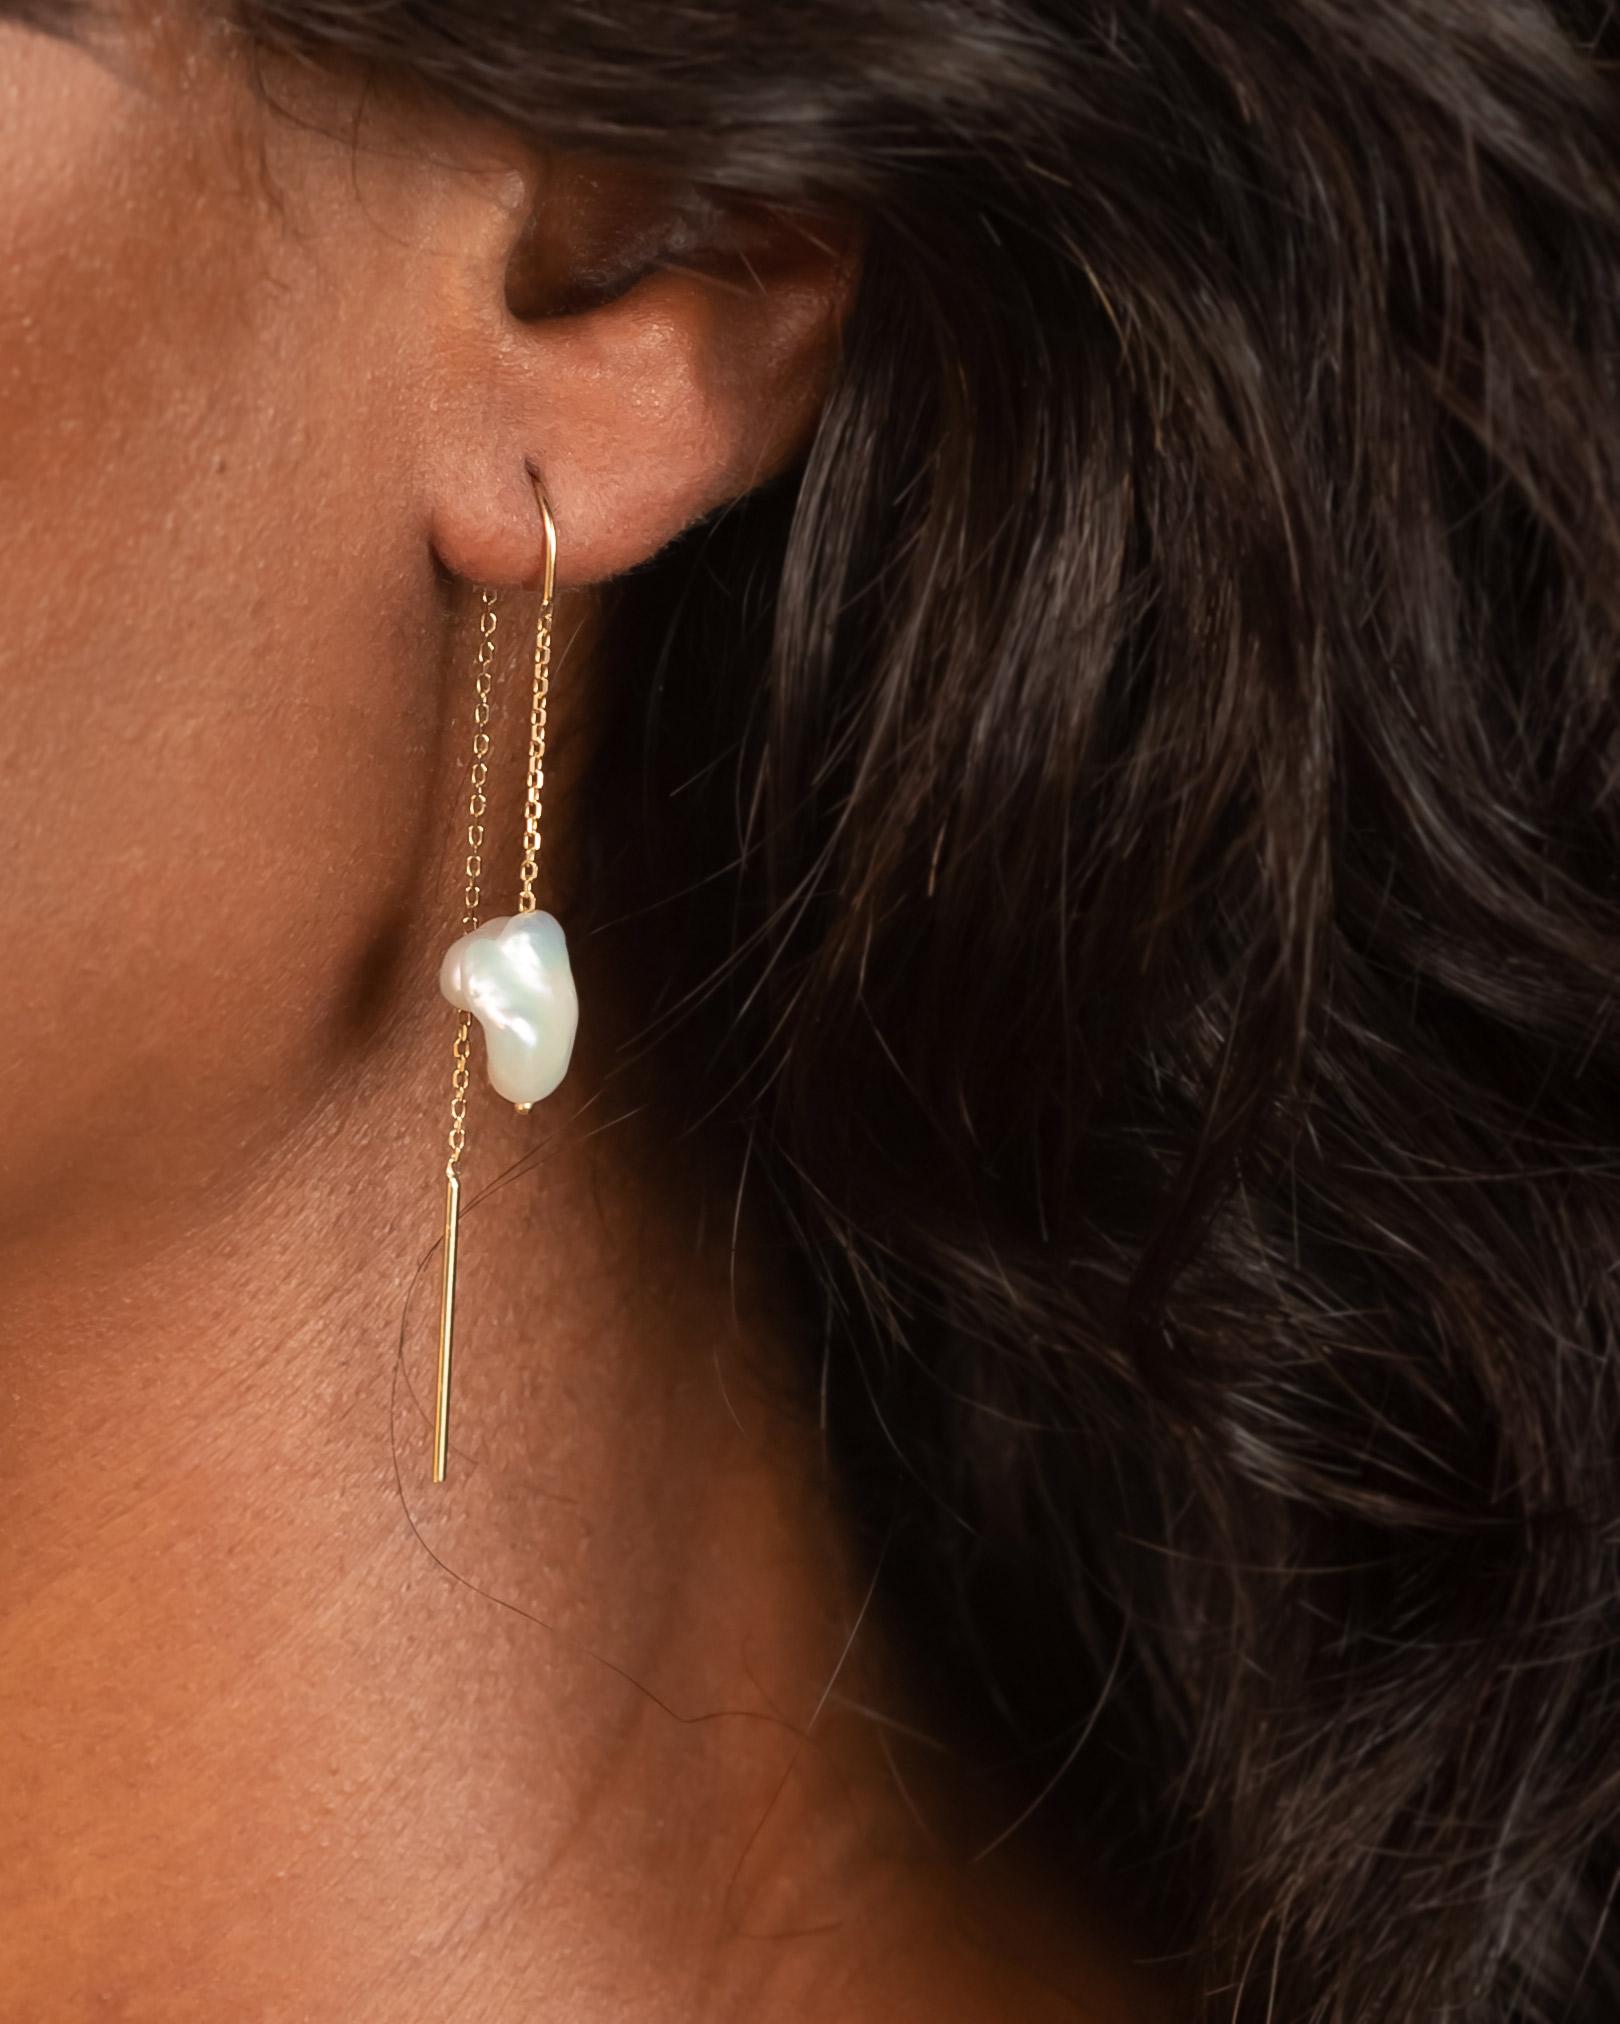 We've paired adorable baby baroque pearls with recycled 14k gold for a great earring that works just as well with a tee shirt as it does with a skin-baring slipdress.  The lightweight chain and gold bar threads comfortably through the ear, and